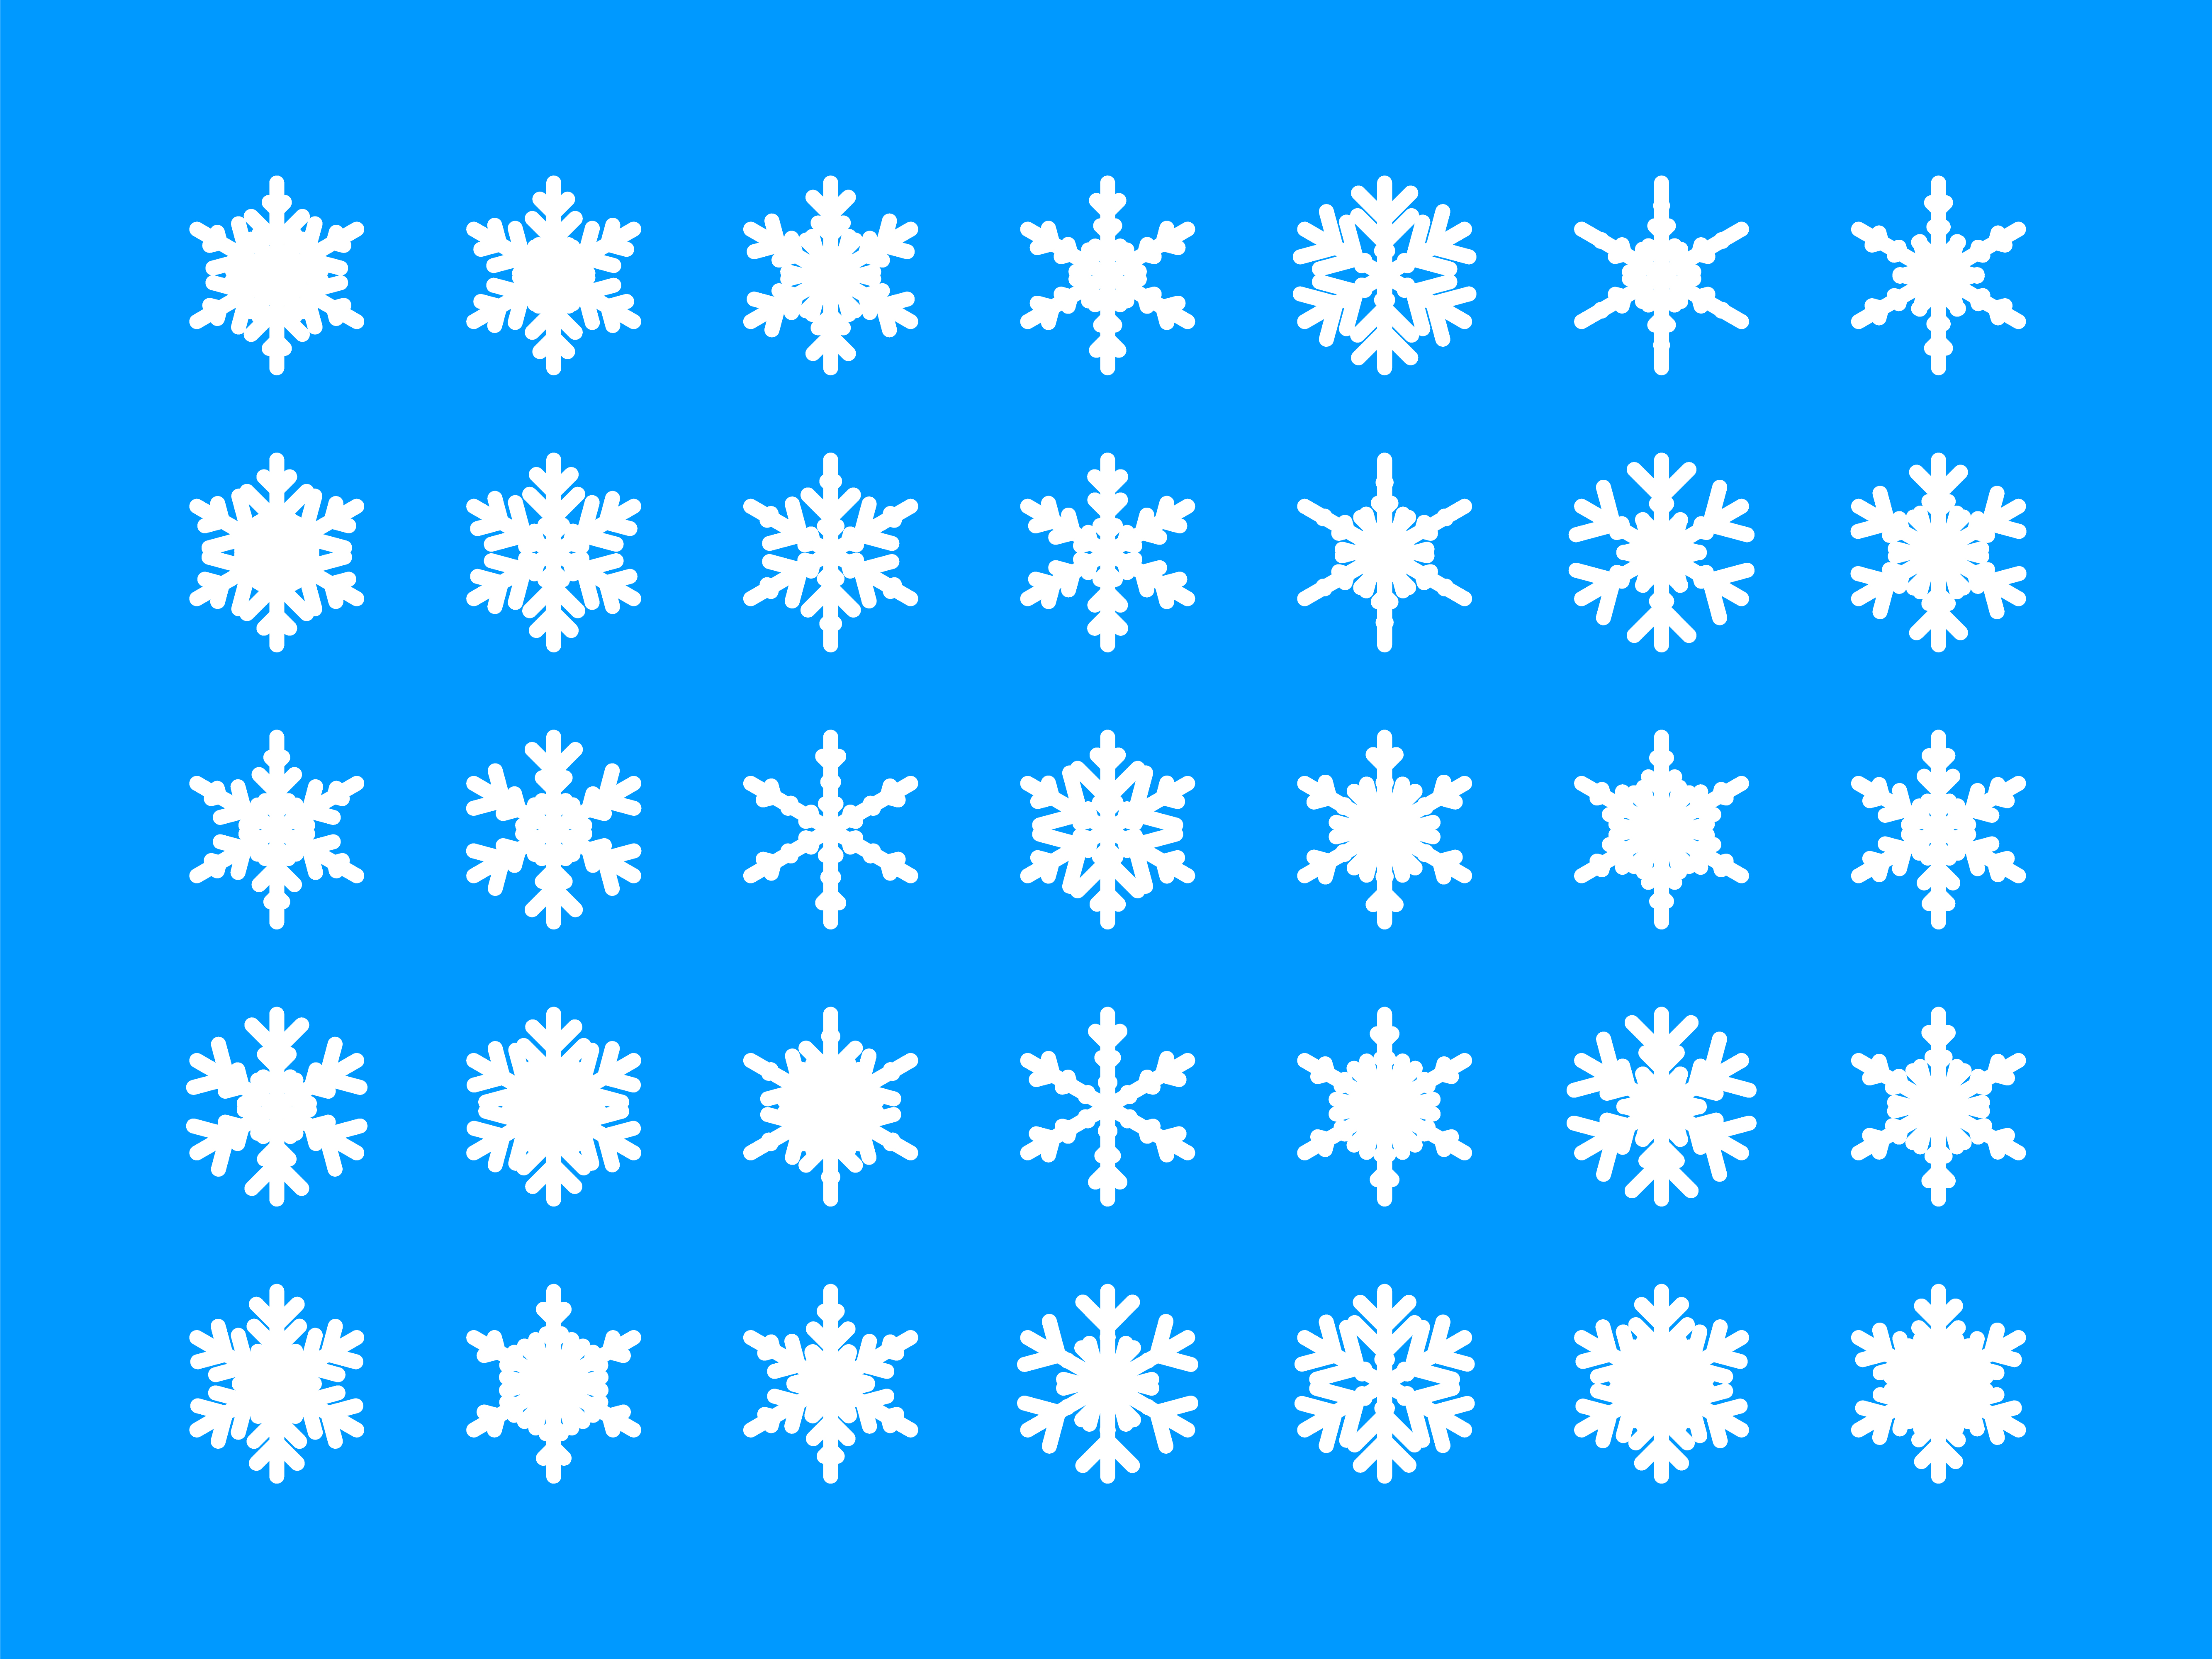 White snowflakes collection 680665 - Download Free Vectors, Clipart